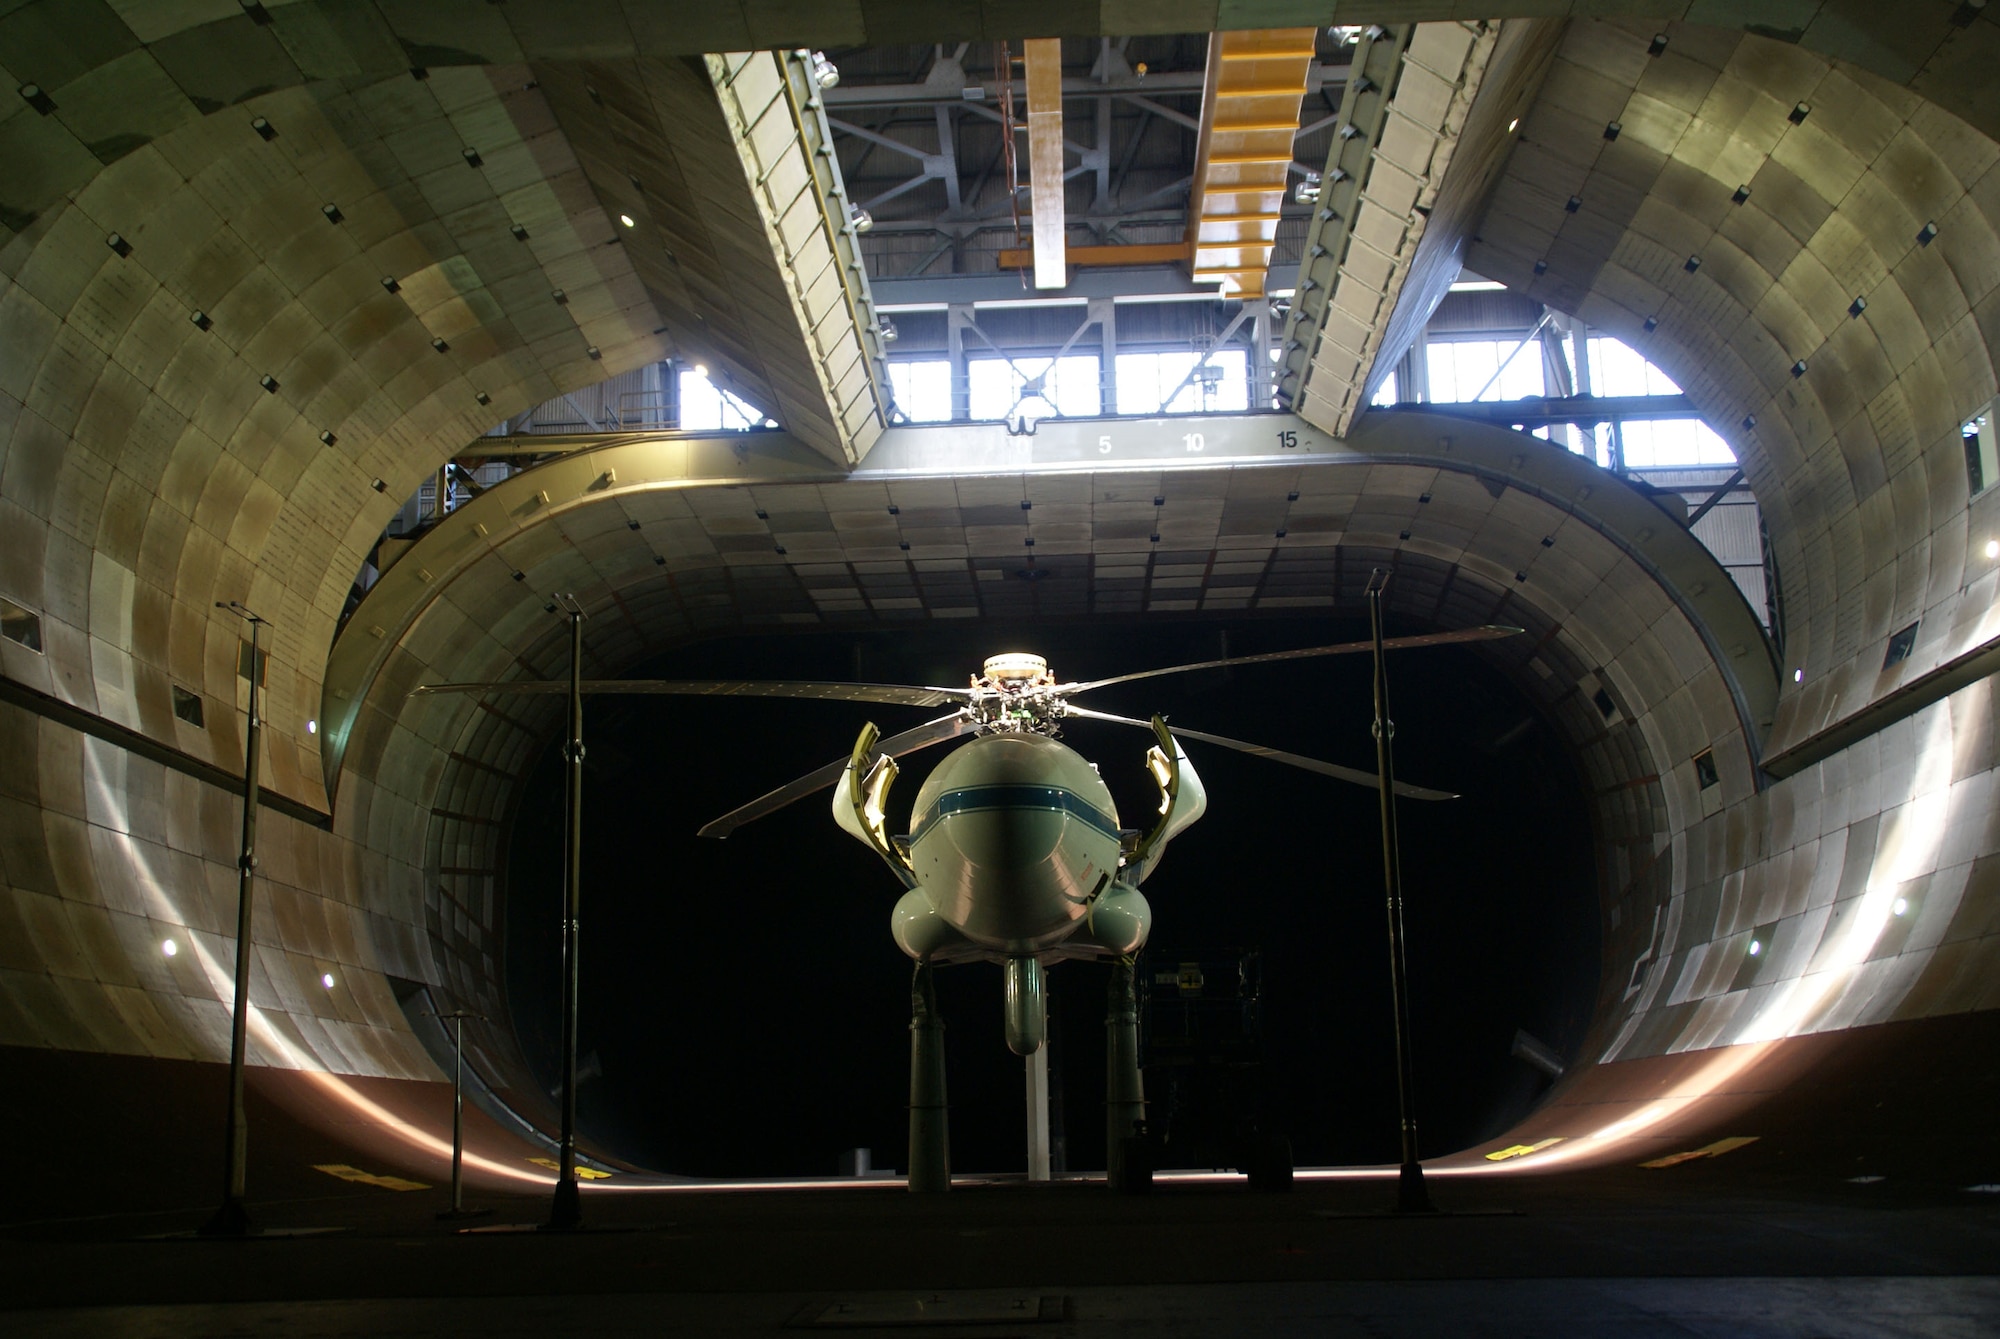 In 2009, a UH-60 Blackhawk rotor was mounted on the Large Rotor Test Apparatus during testing of the Individual Blade Control system at the National Full-Scale Aerodynamics Complex’s 40- by 80-foot wind tunnel in Mountain View, California. (U.S. Air Force photo by Philip Lorenz III)